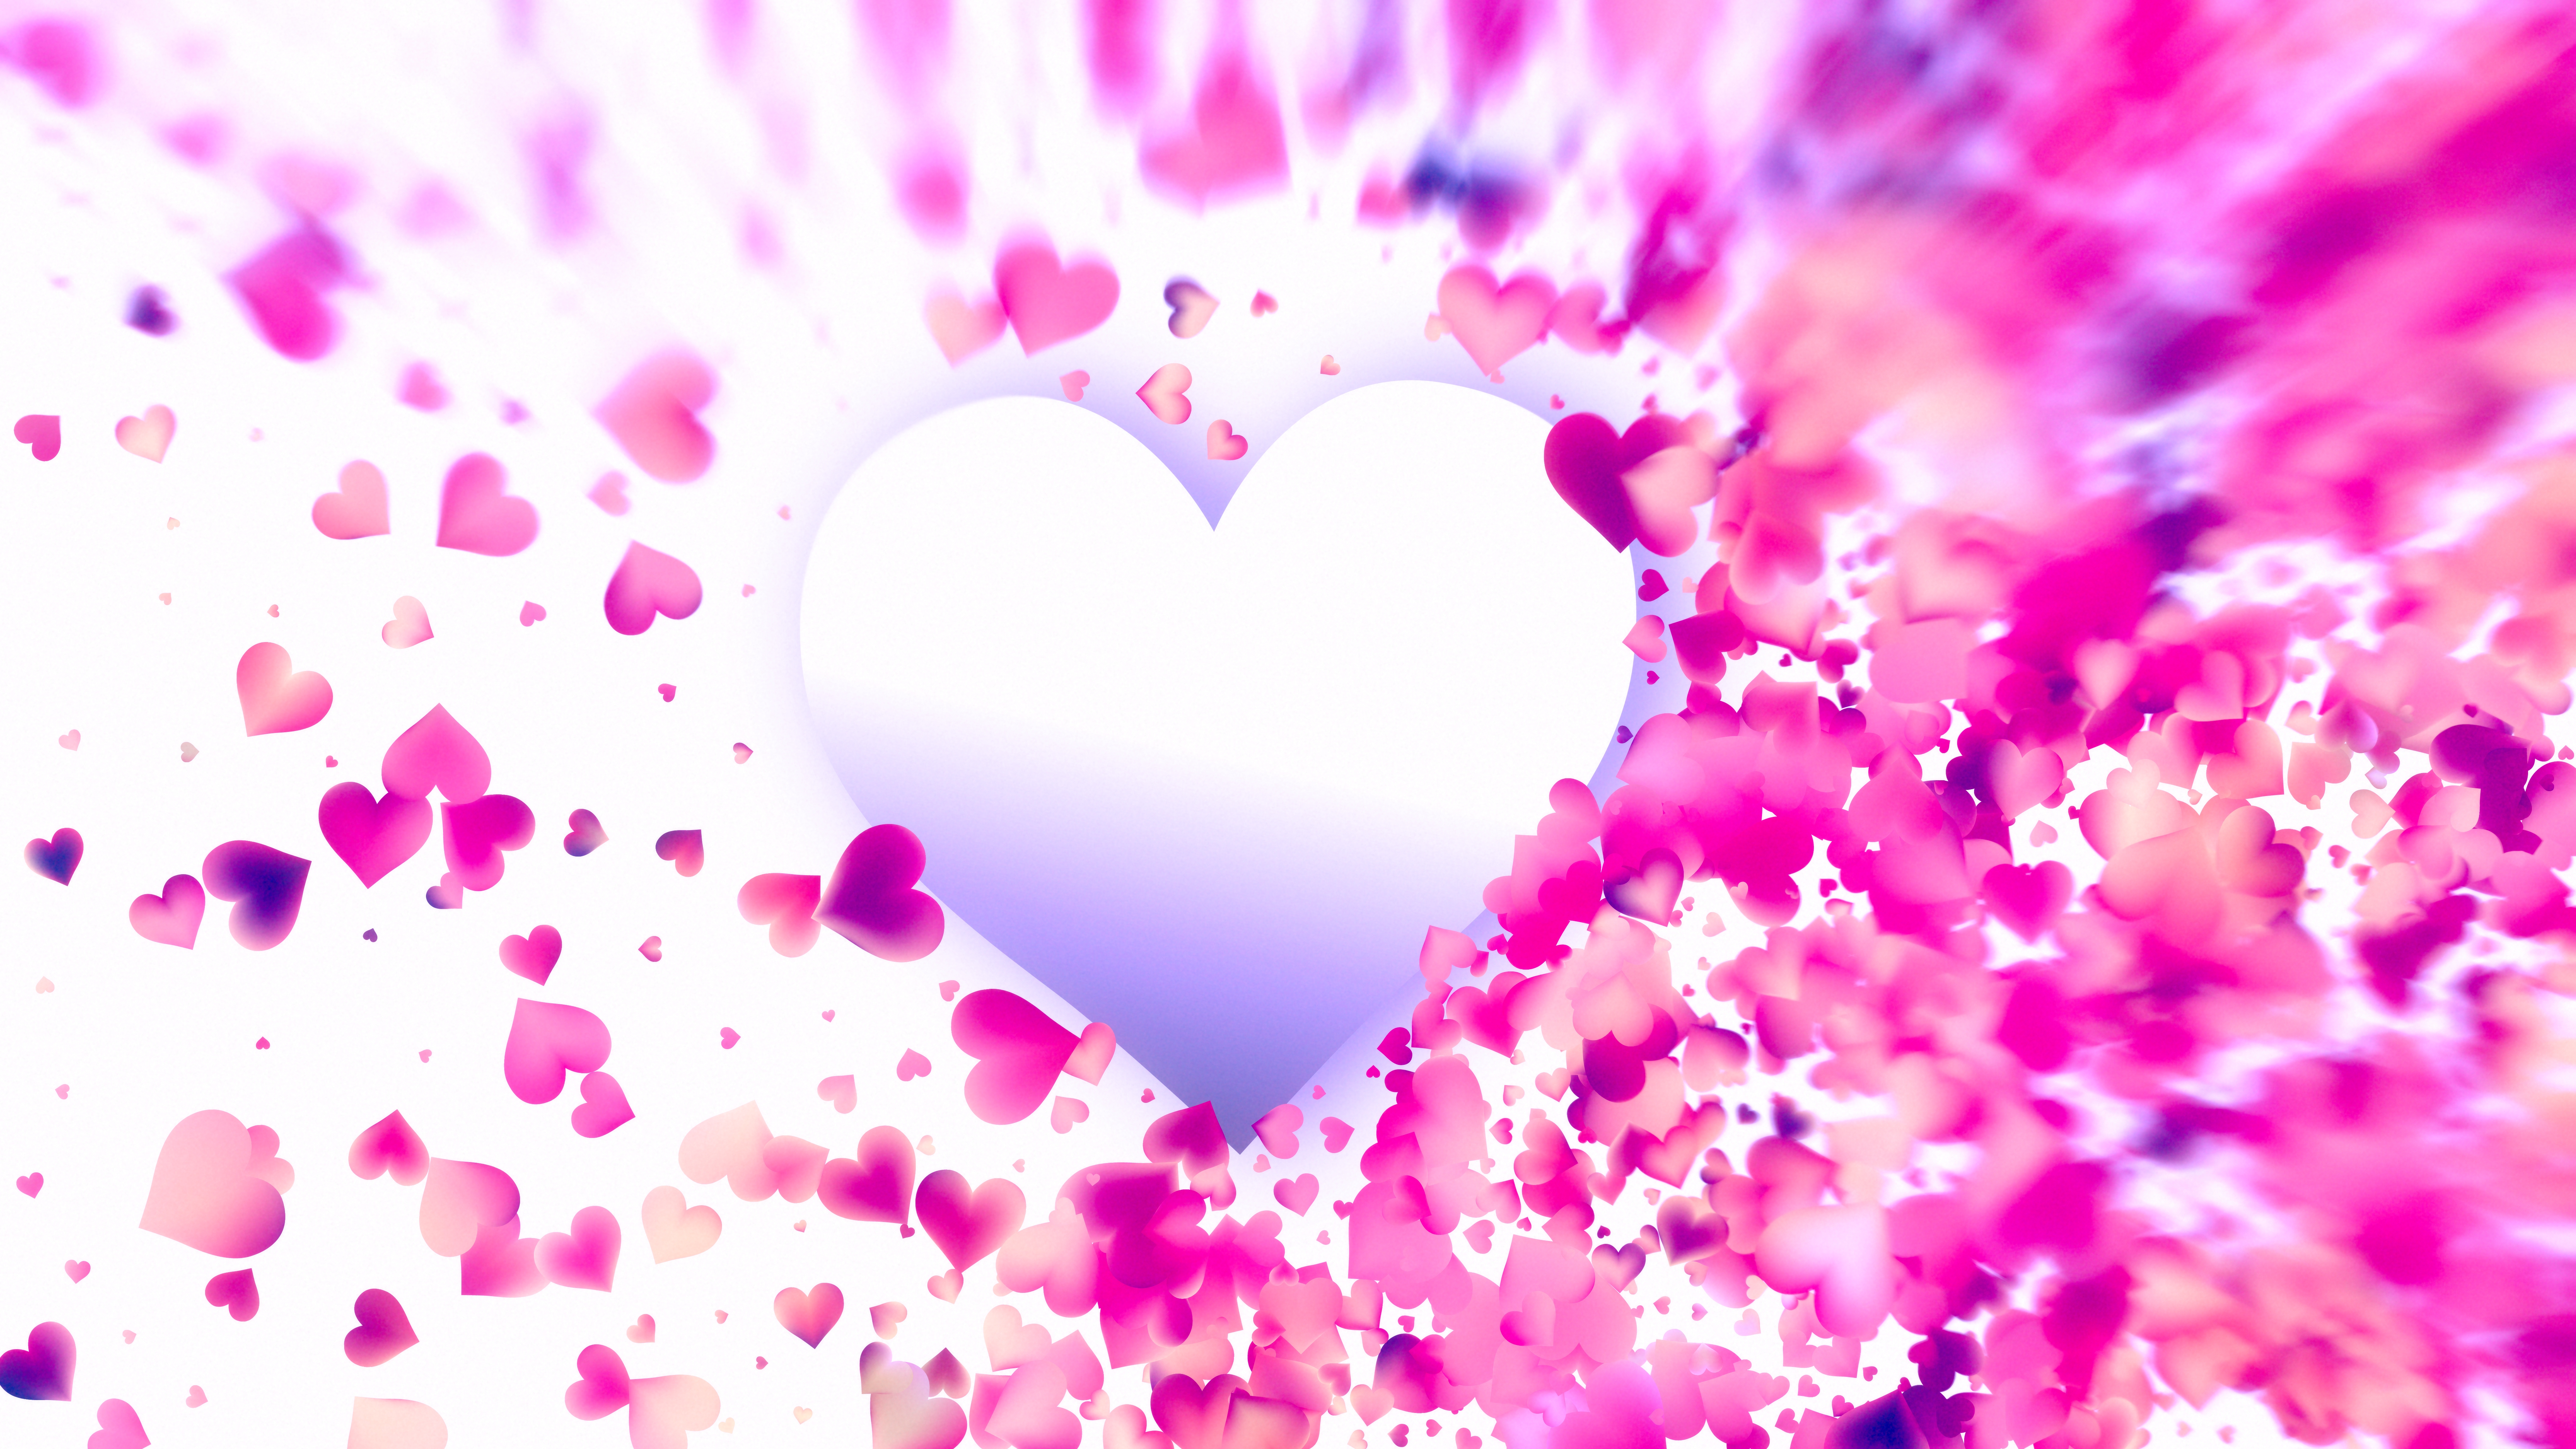 Free Blurred Pink and White Valentines Day Background Graphic